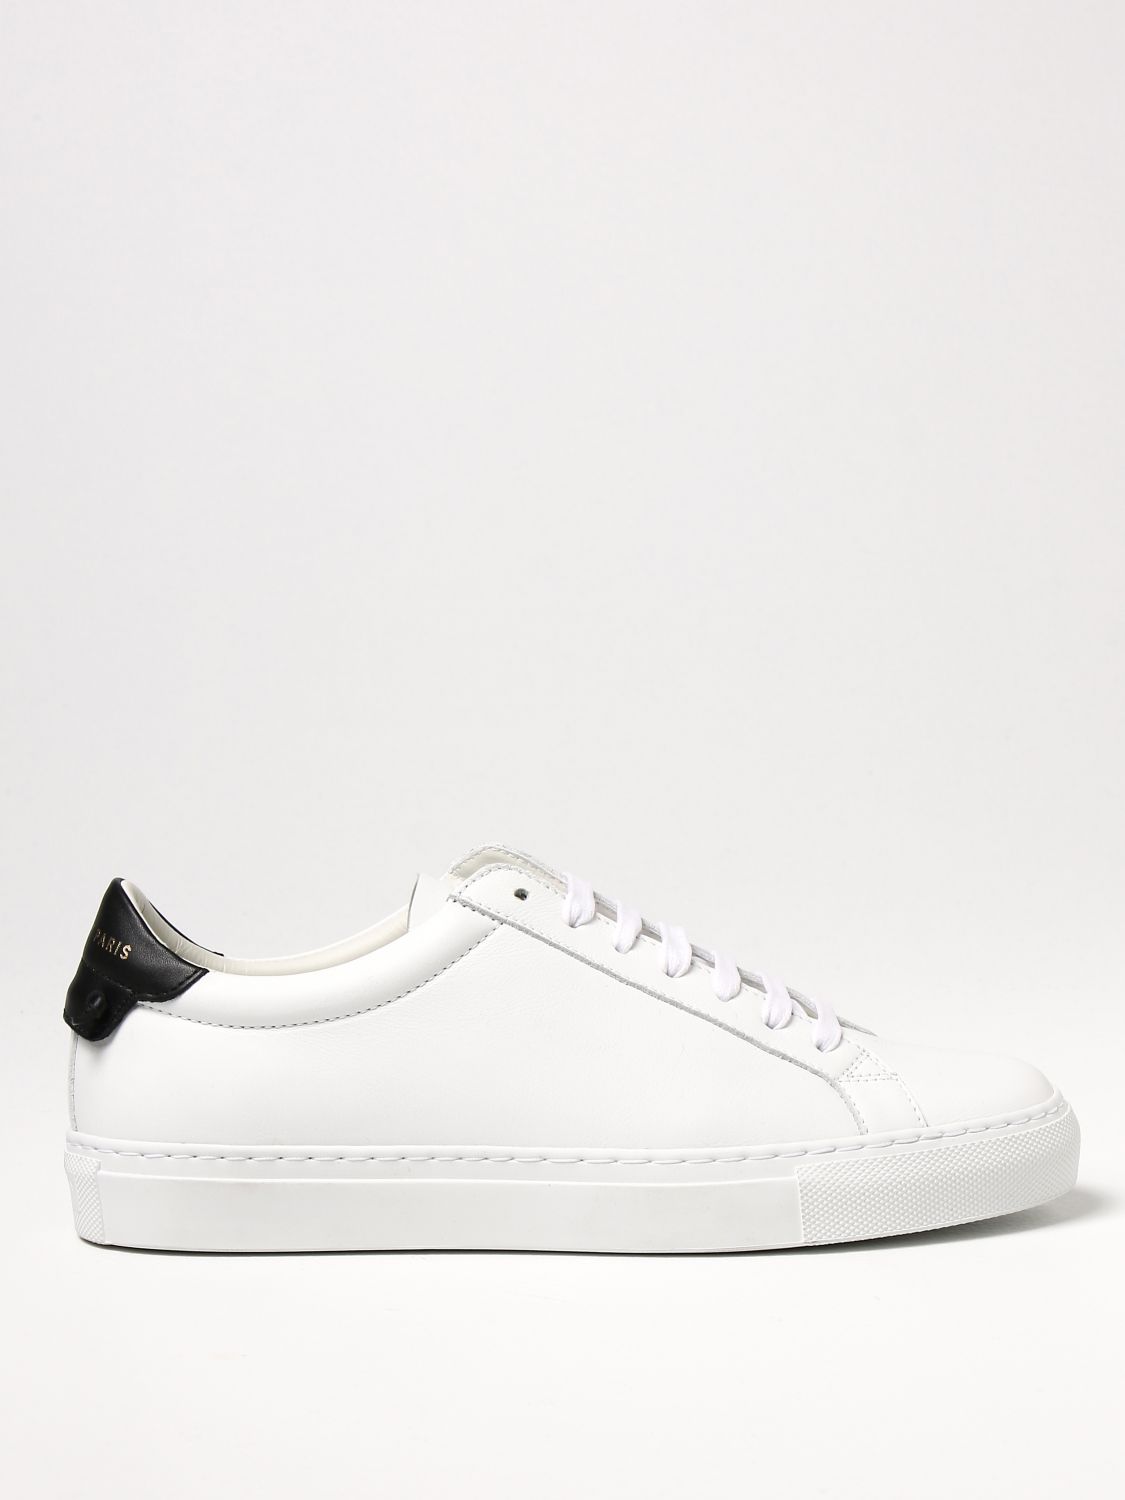 GIVENCHY: Damen Sneakers - Weiß | GIVENCHY Sneakers BE0003E0DC online ...